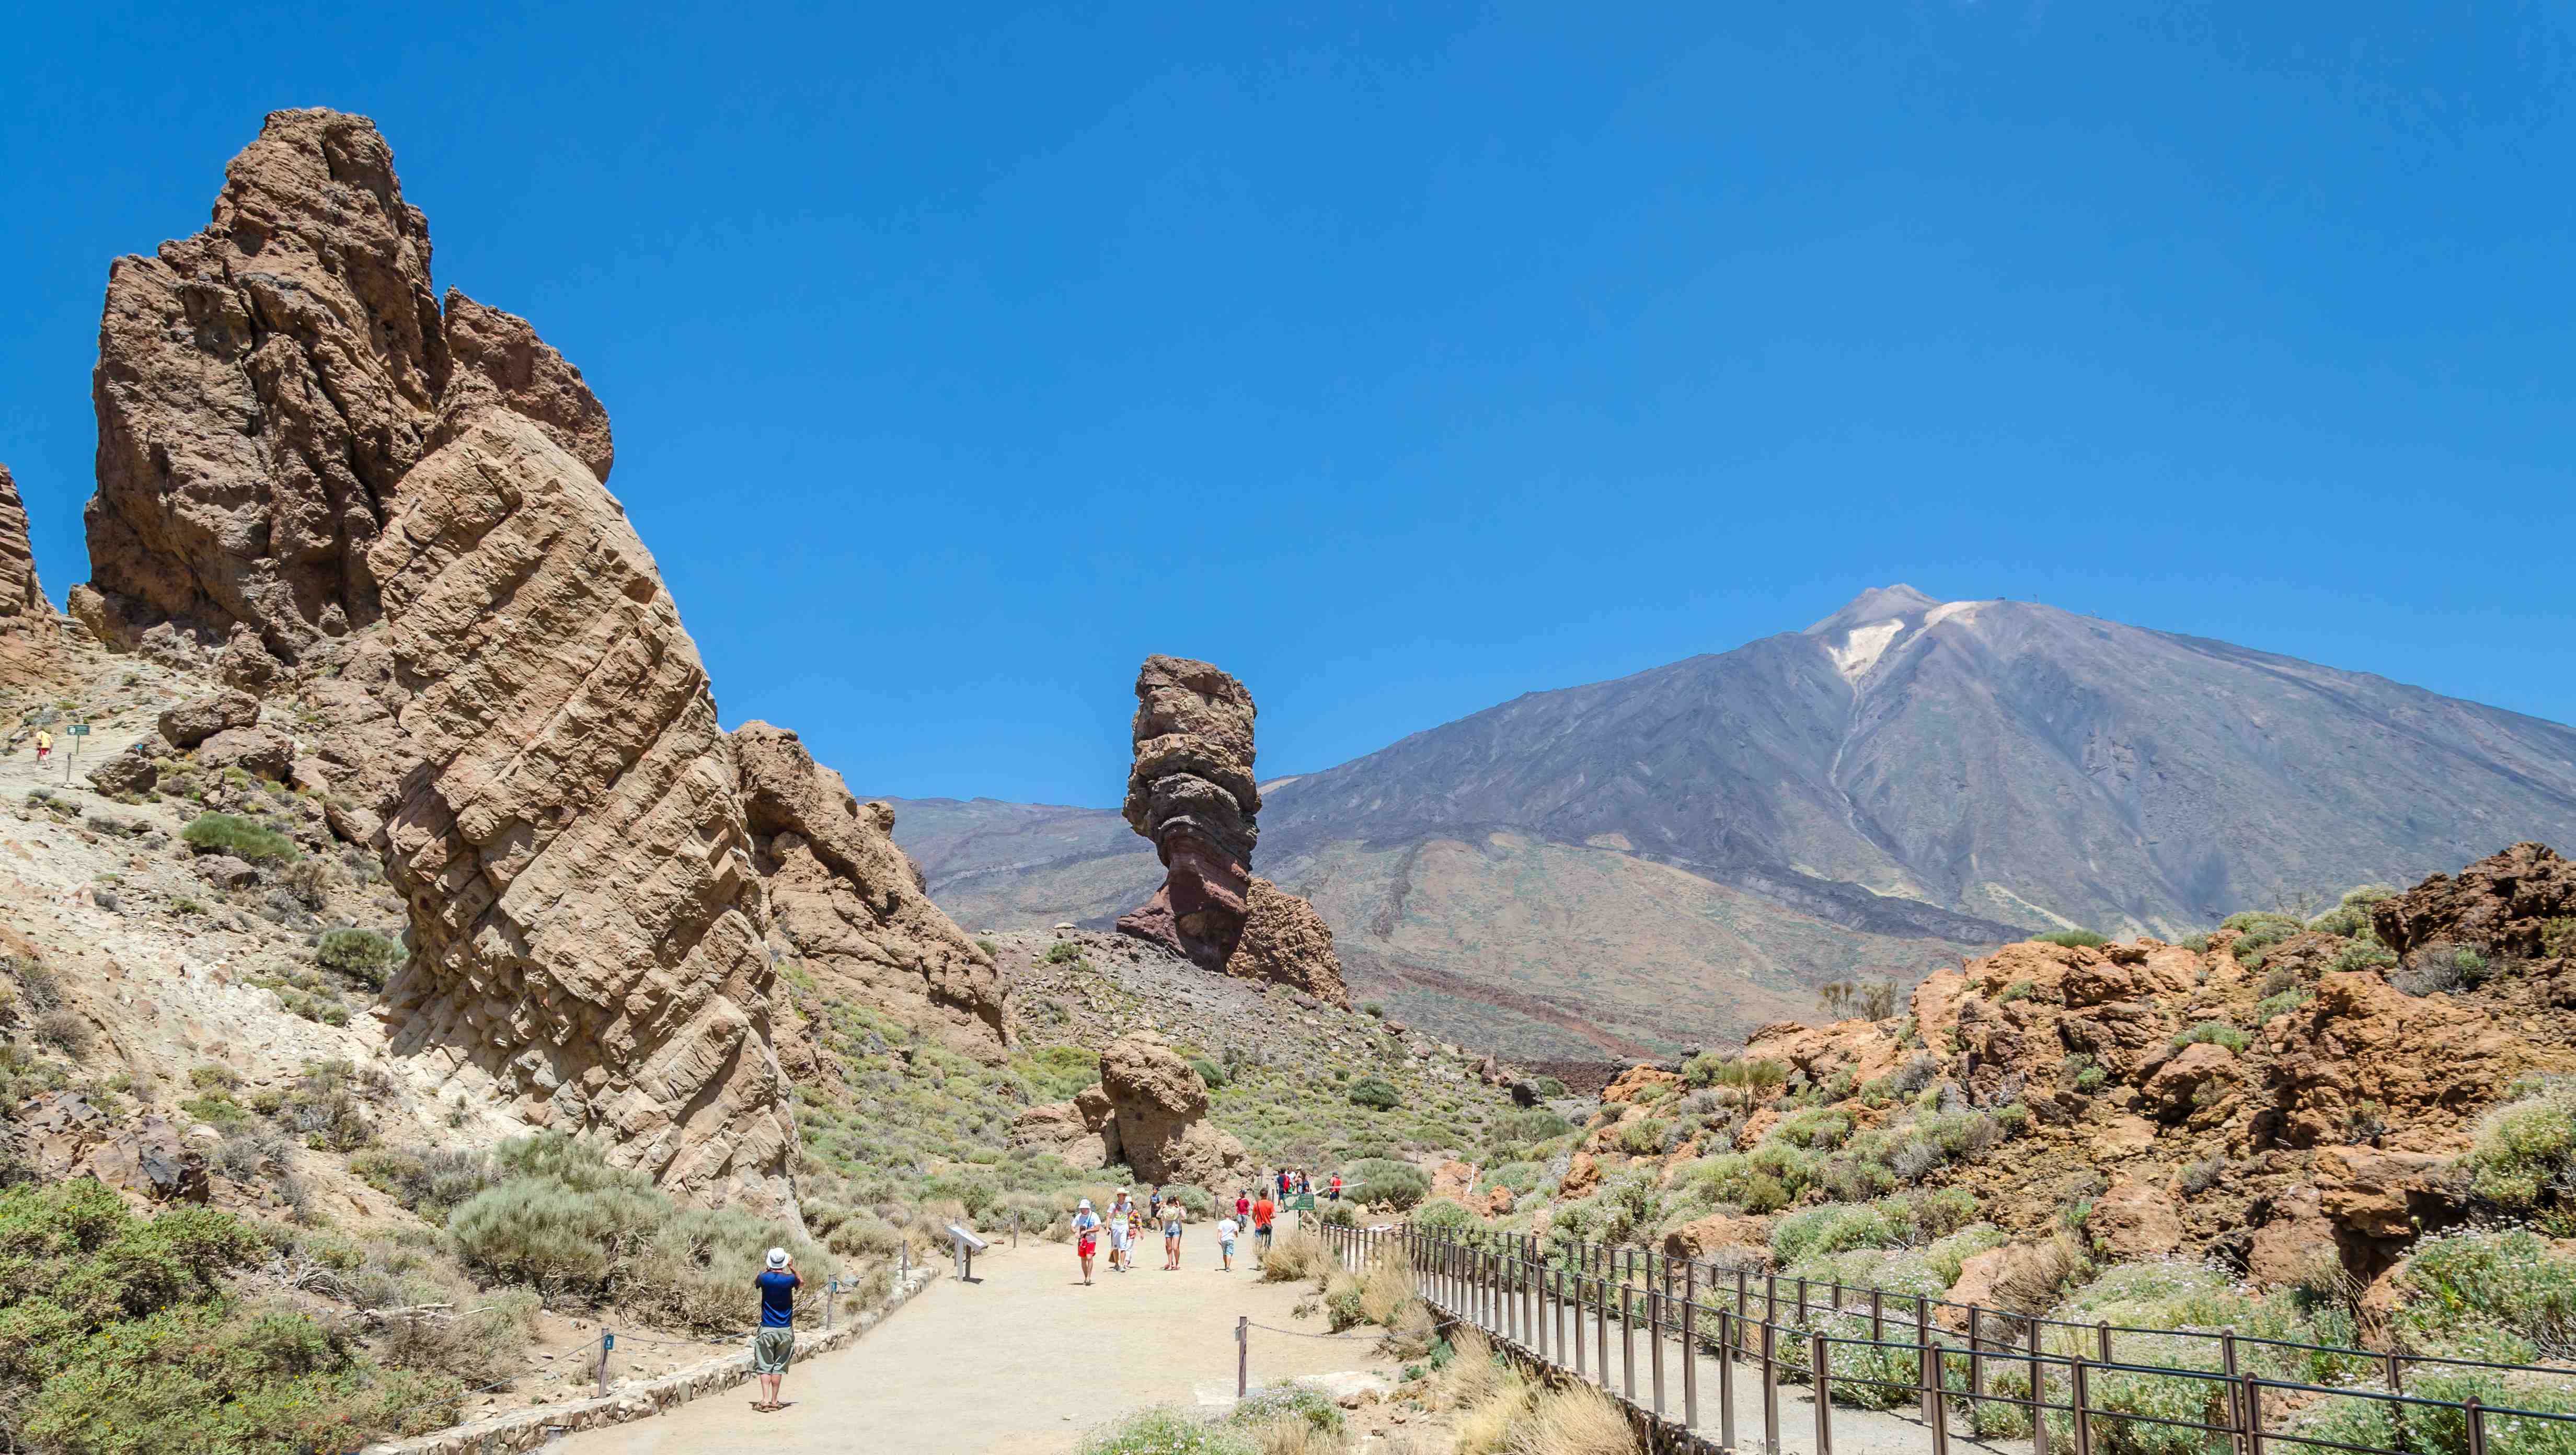 Views of Mount Teide and volcanic formations, Tenerife.